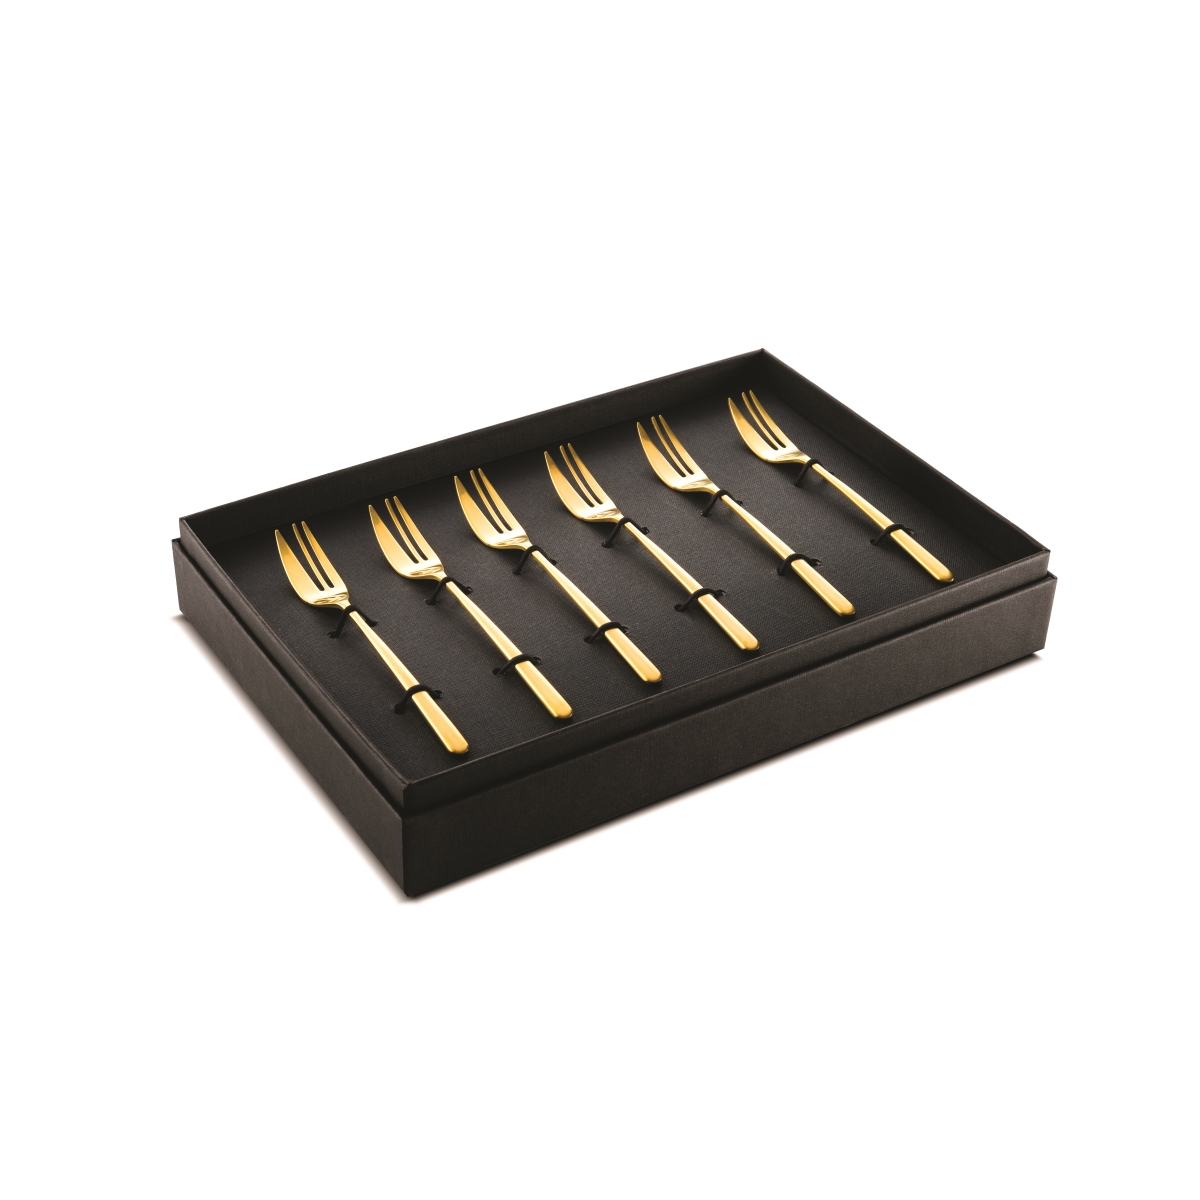 Picture of Mepra 108144115 Linea Ice Oro Cake Fork Set - 6 Piece